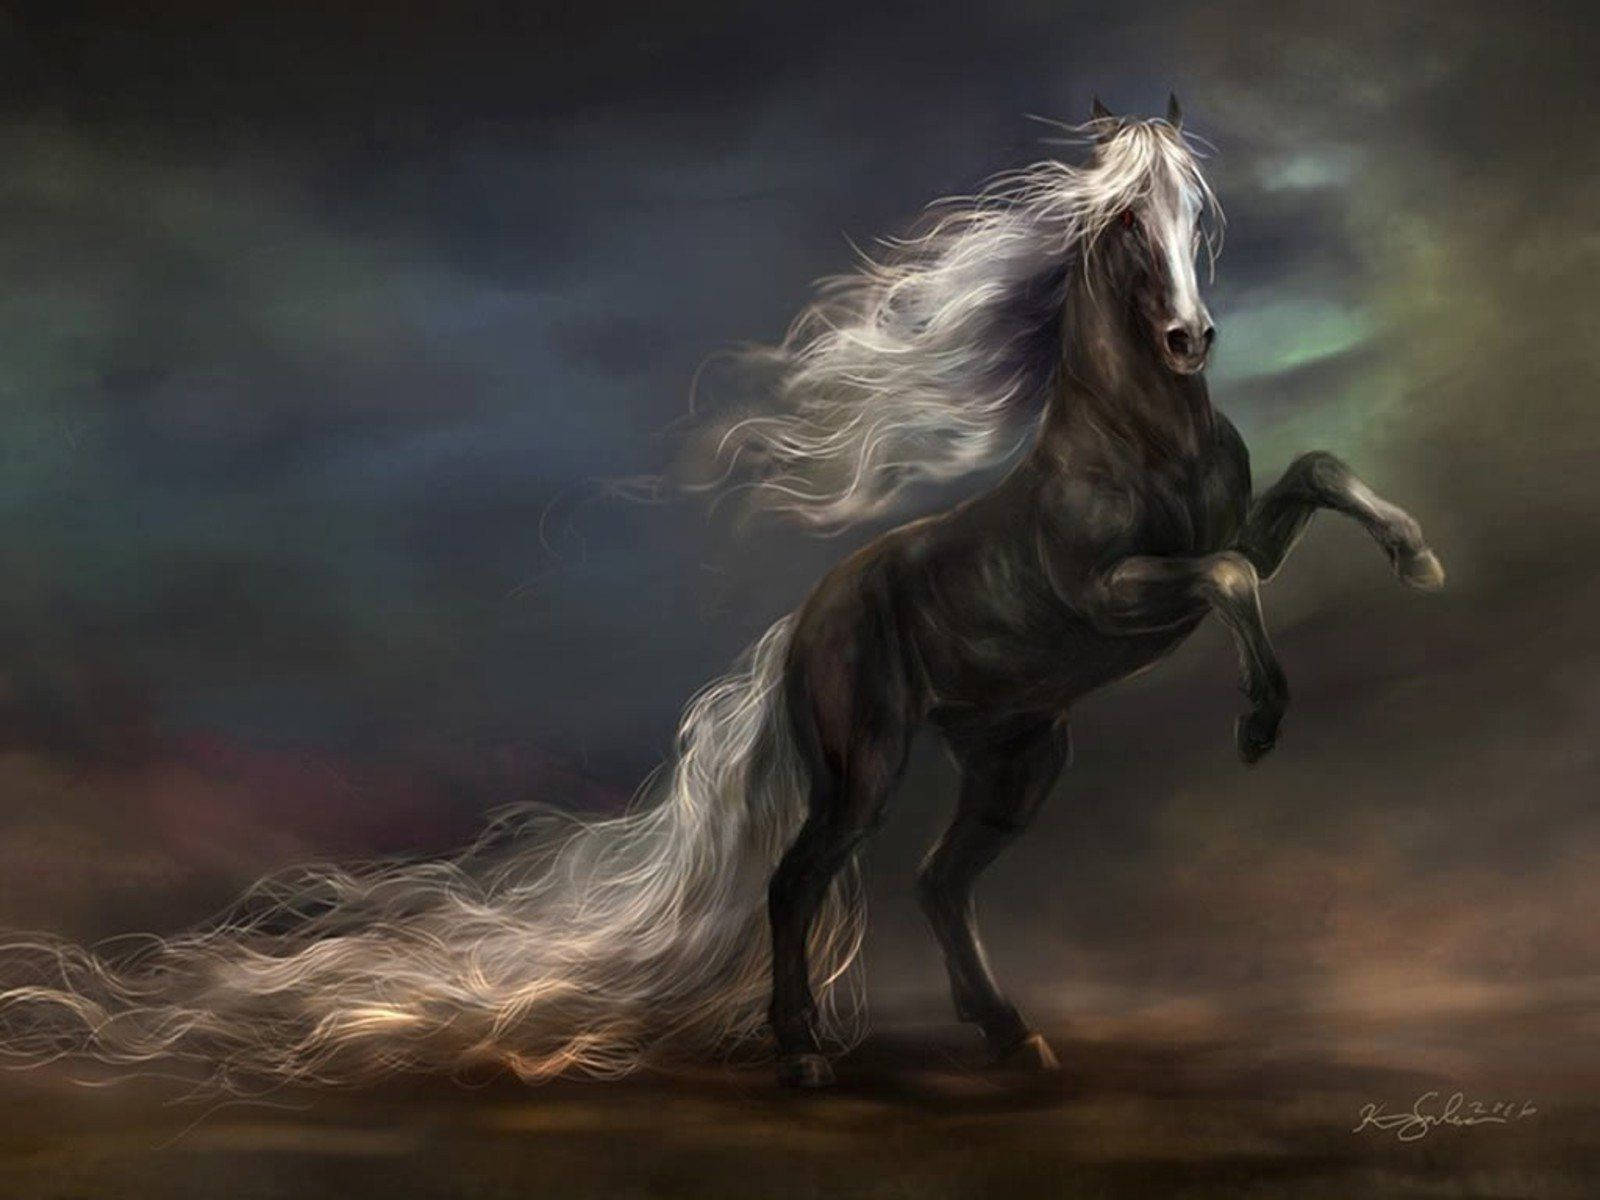 A Black Horse in Midair Stretching Out Its Neck and Mane Wallpaper